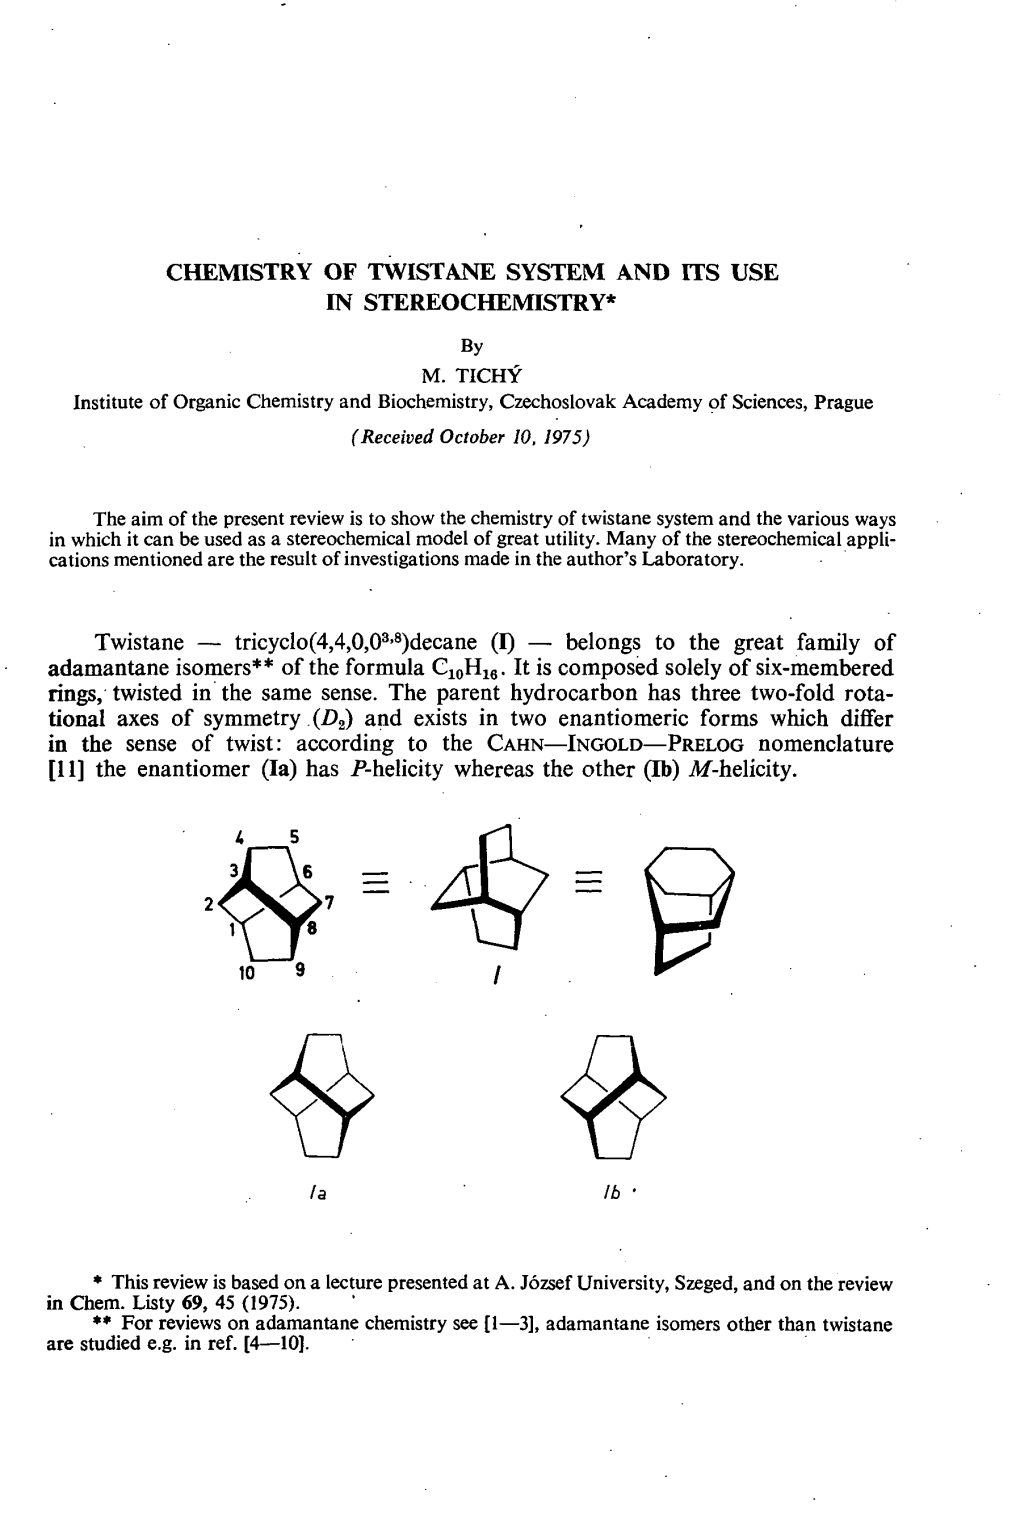 By M. TICHY Institute of Organic Chemistry and Biochemistry, Czechoslovak Academy of Sciences, Prague (Received October 10, 1975)